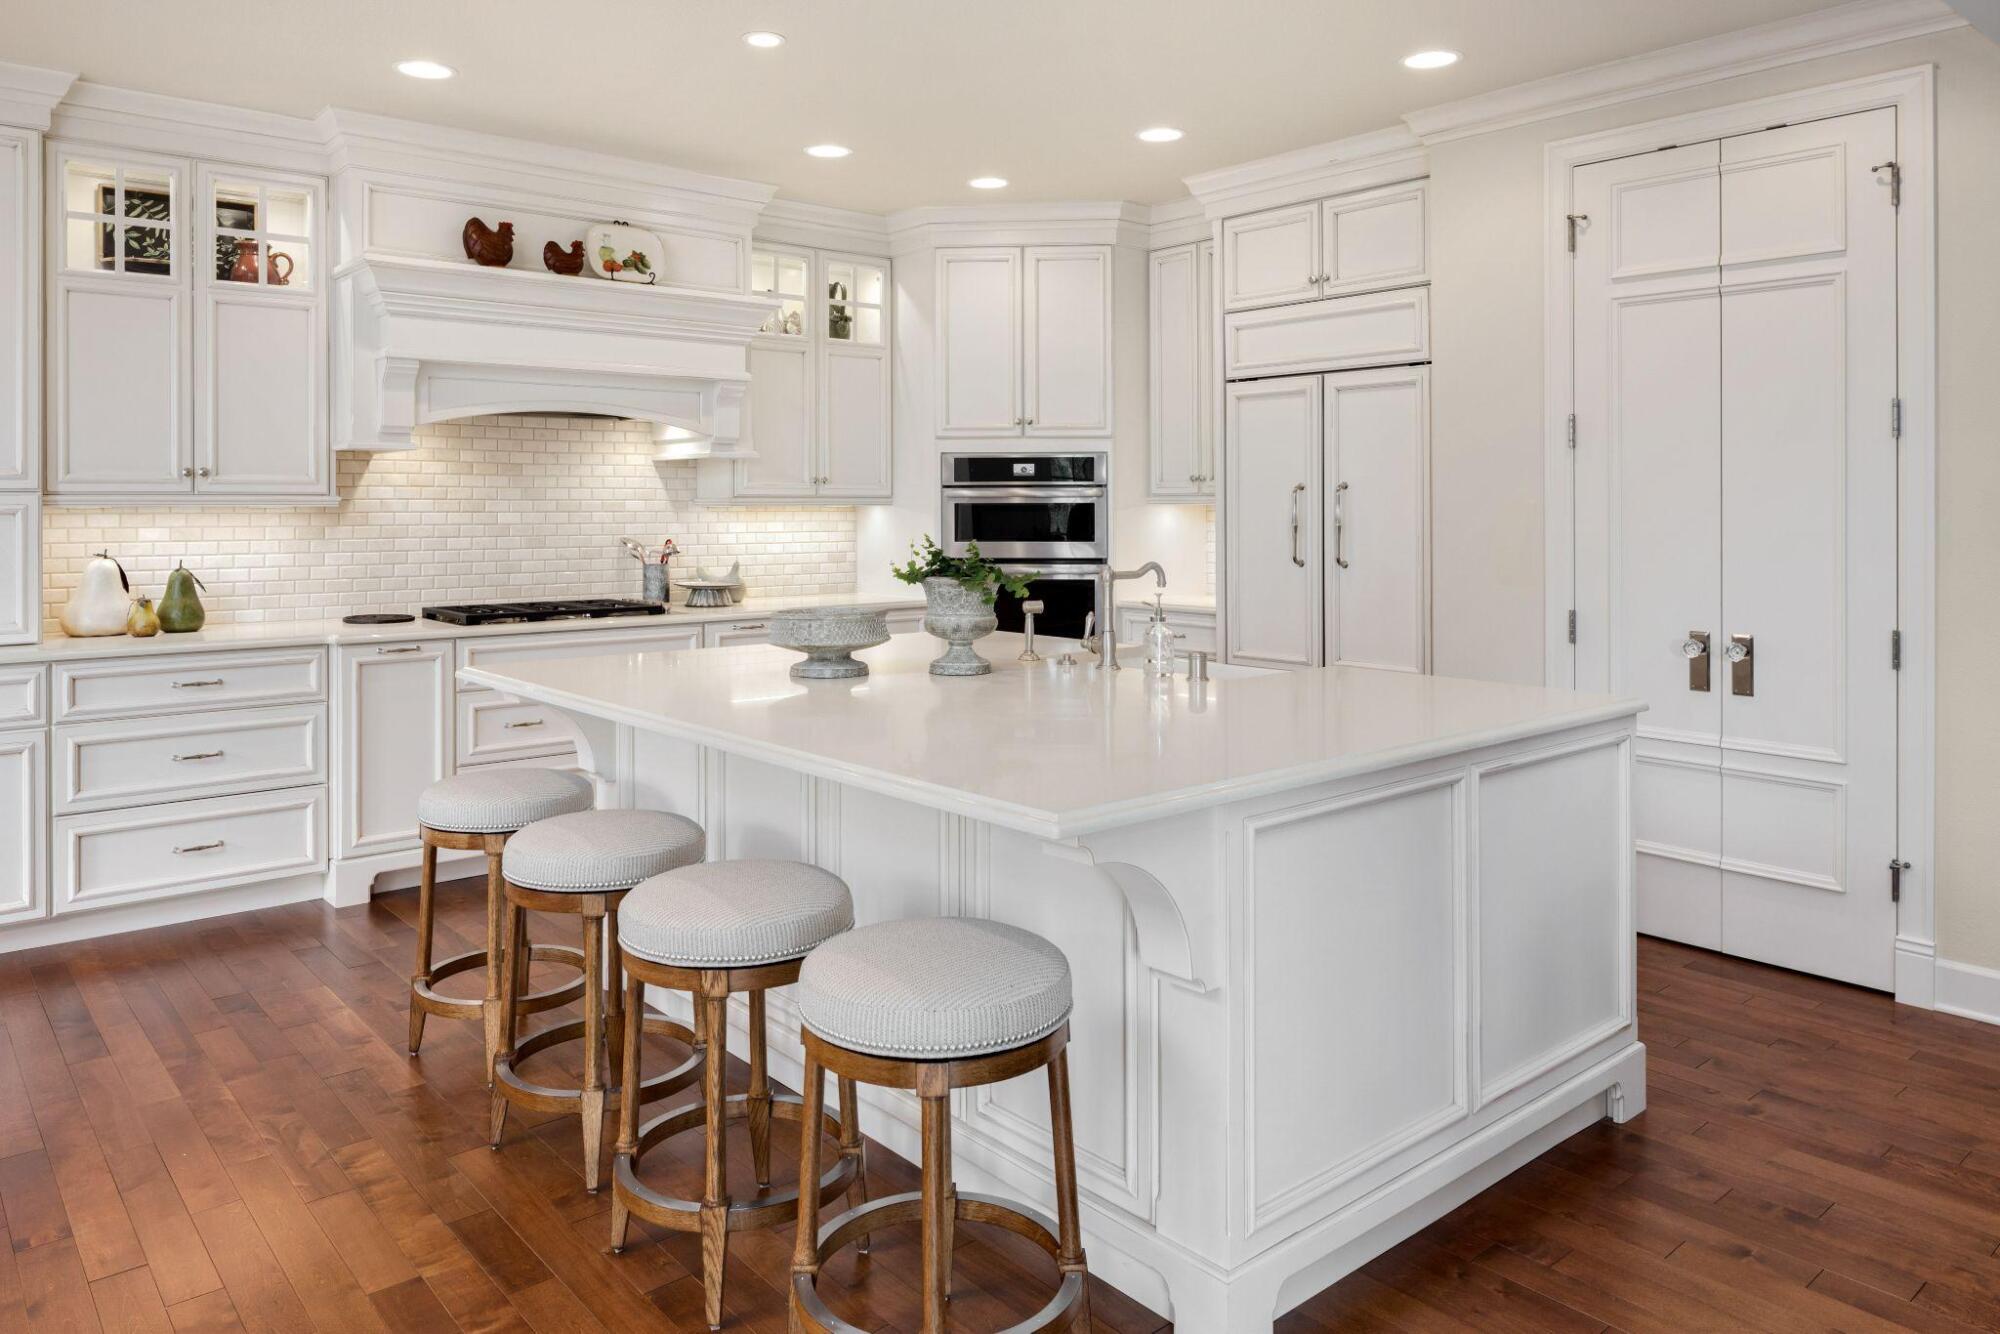 A white kitchen with a center island and stools designed for an organizational kitchen.